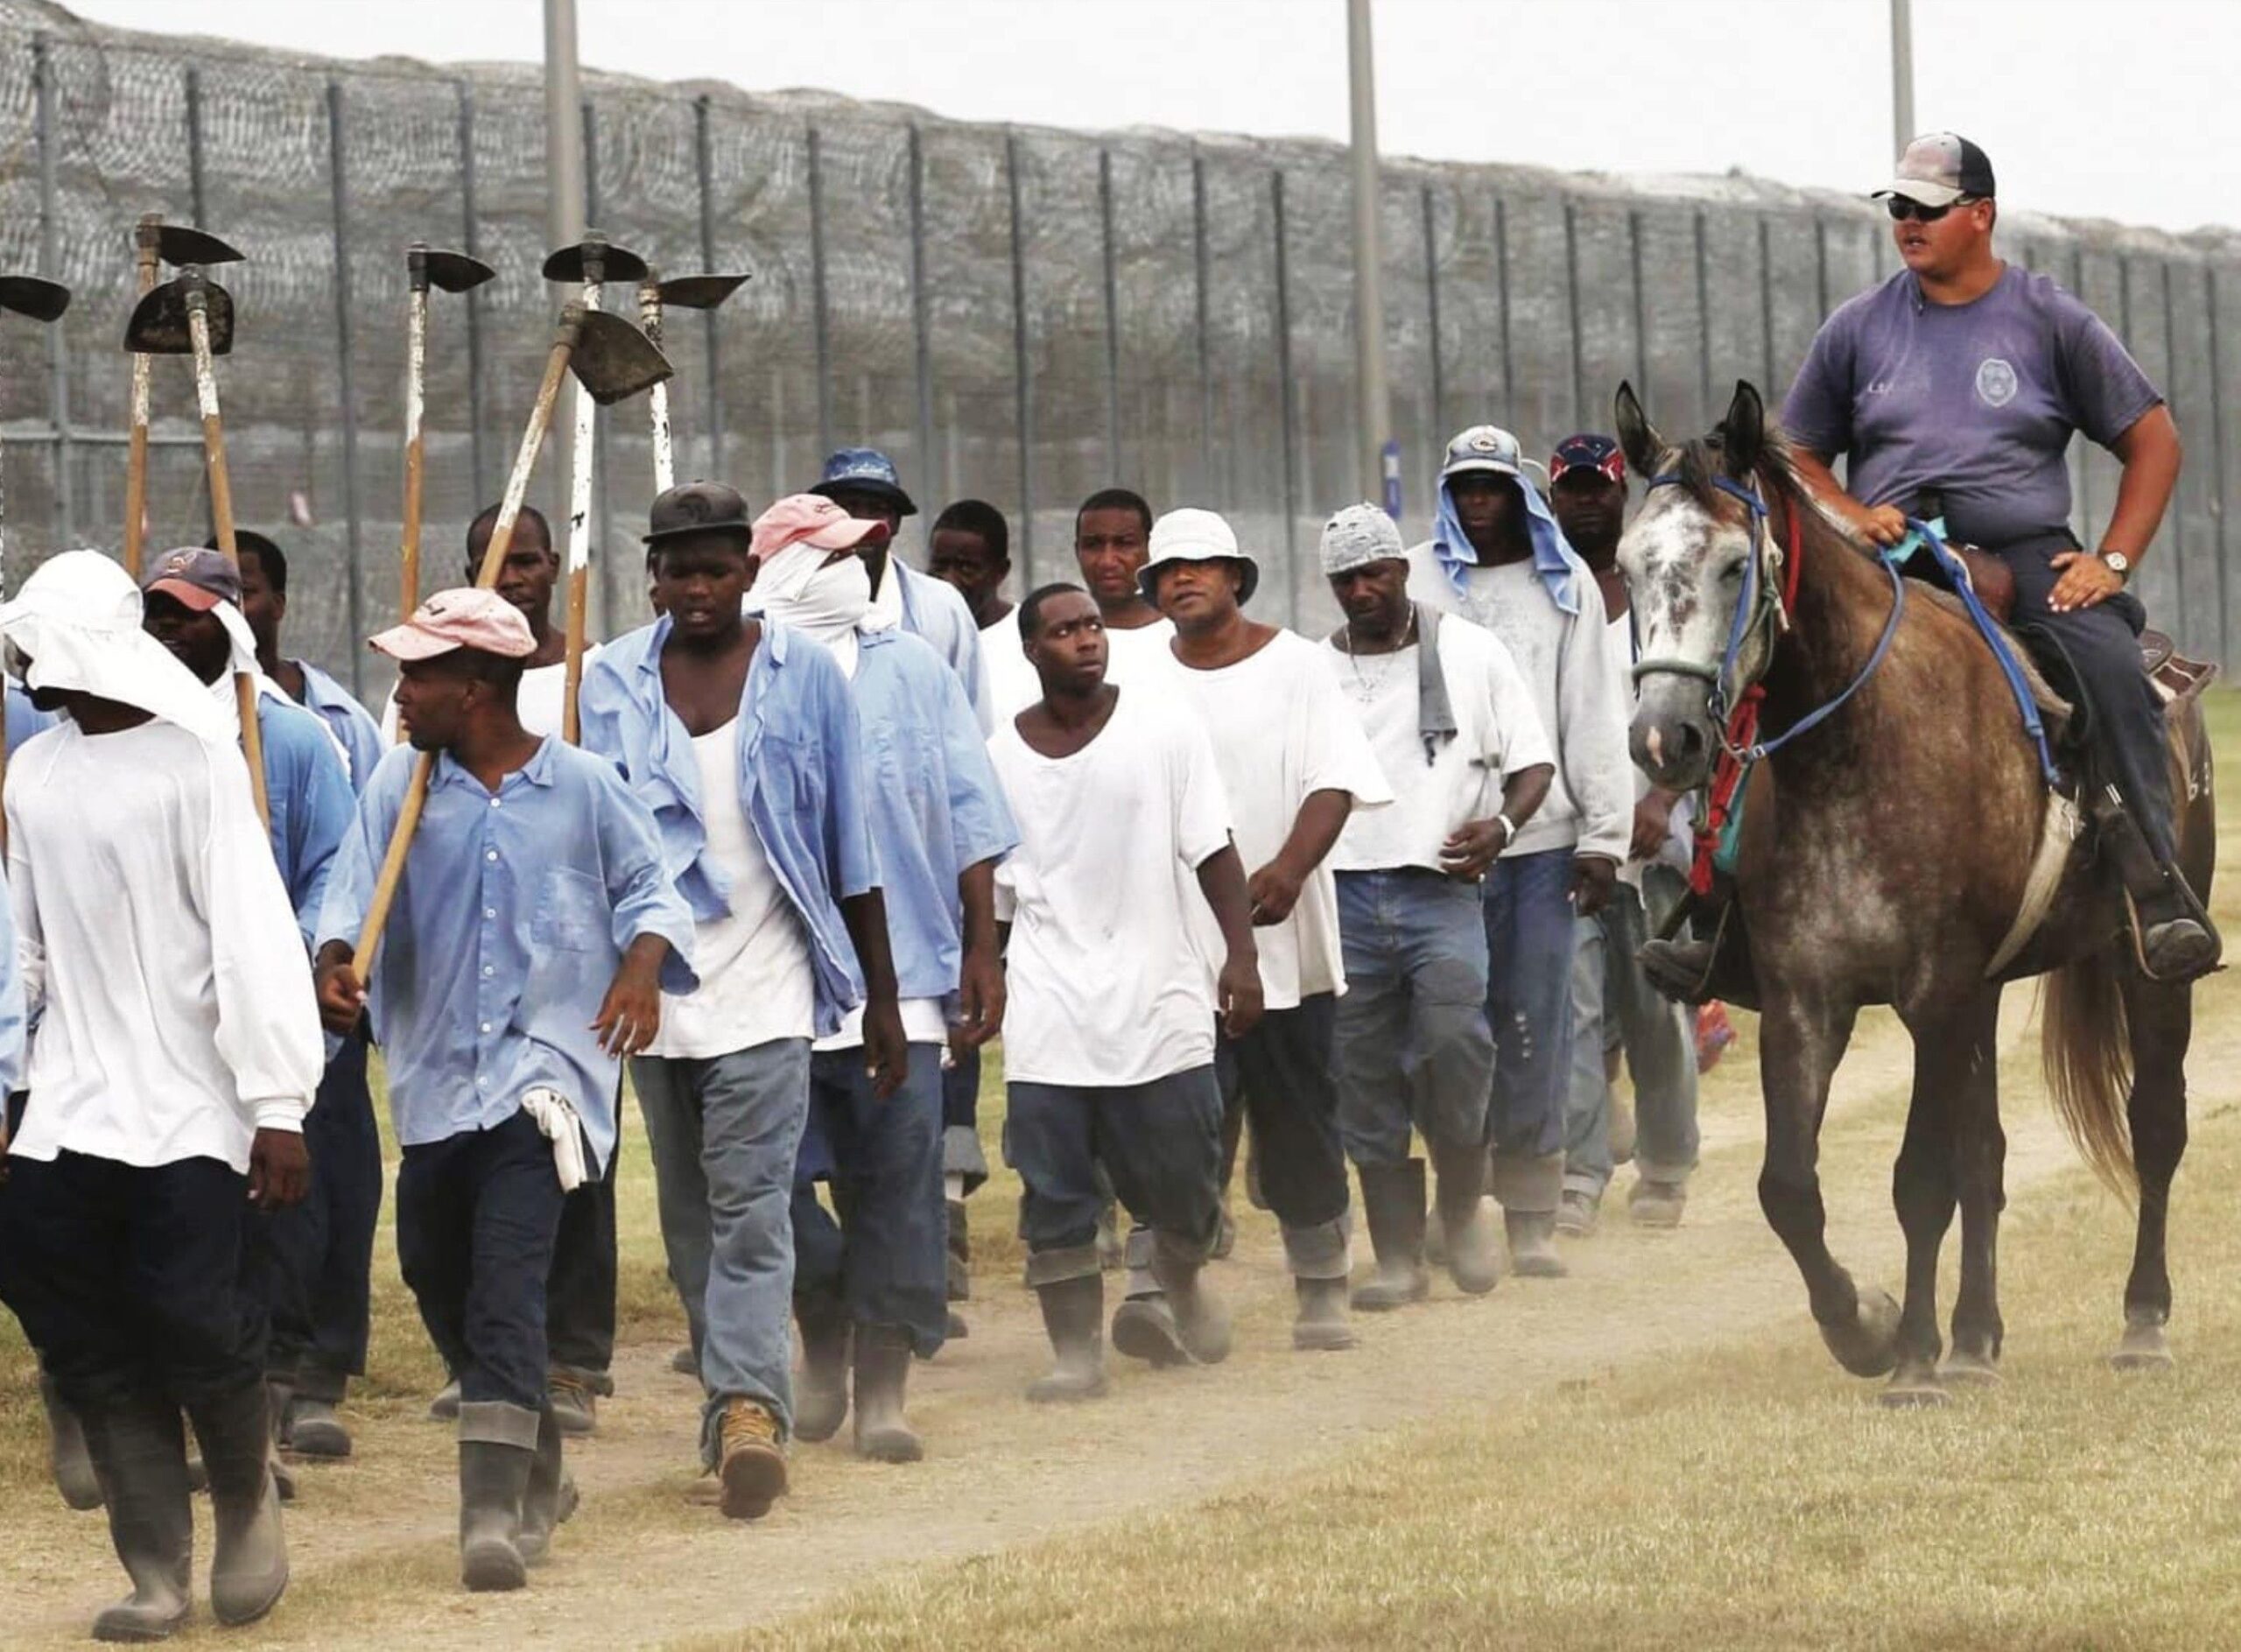 UN Report Urges End to Forced US Prison Labor—a 'Contemporary Form of Slavery'